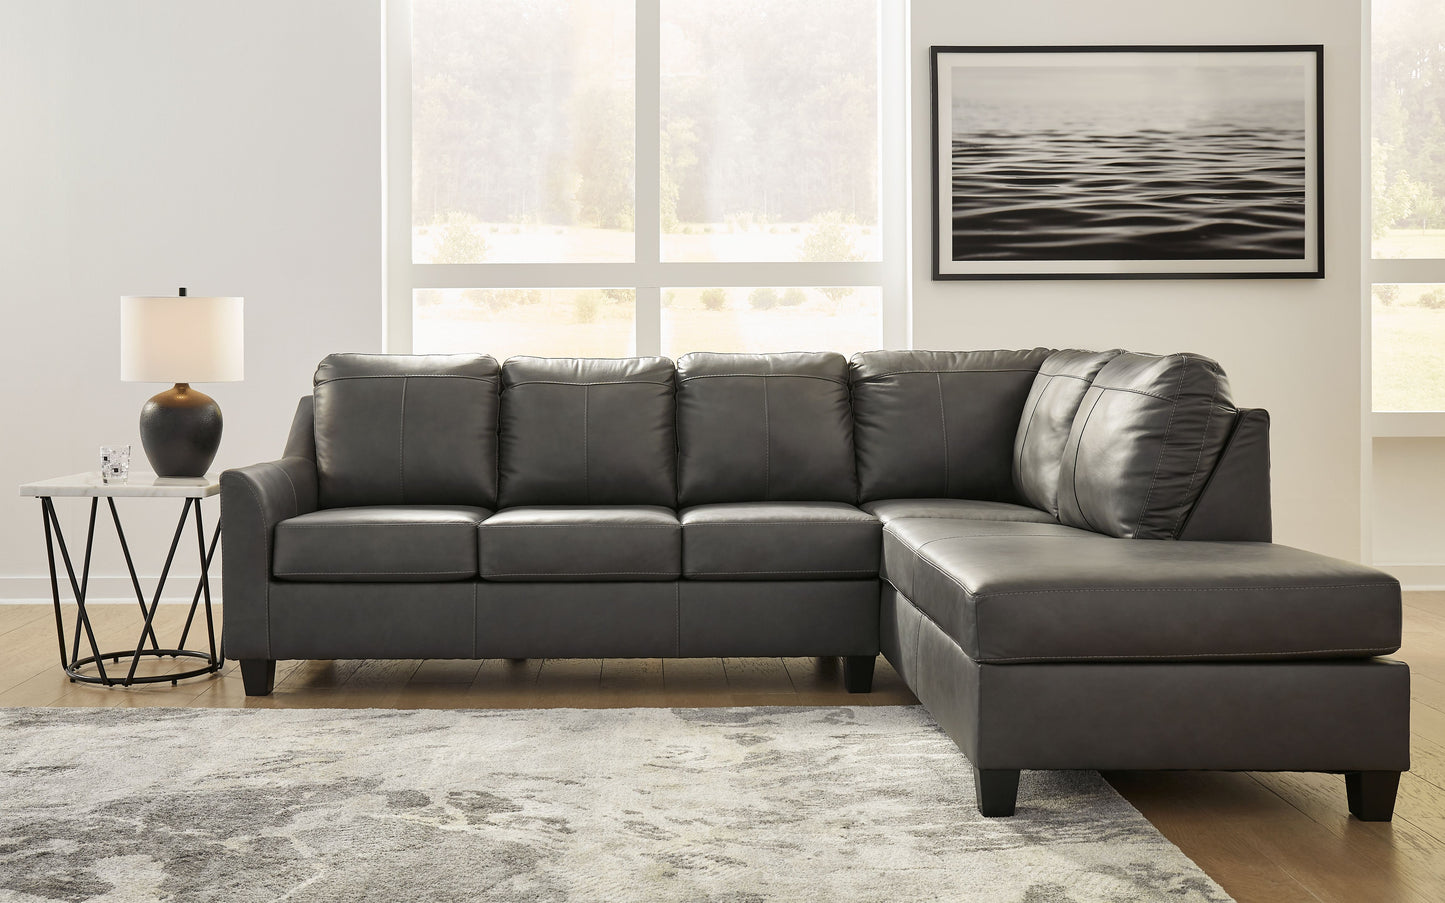 Valderno - Fog - 2-Piece Sectional With Raf Corner Chaise